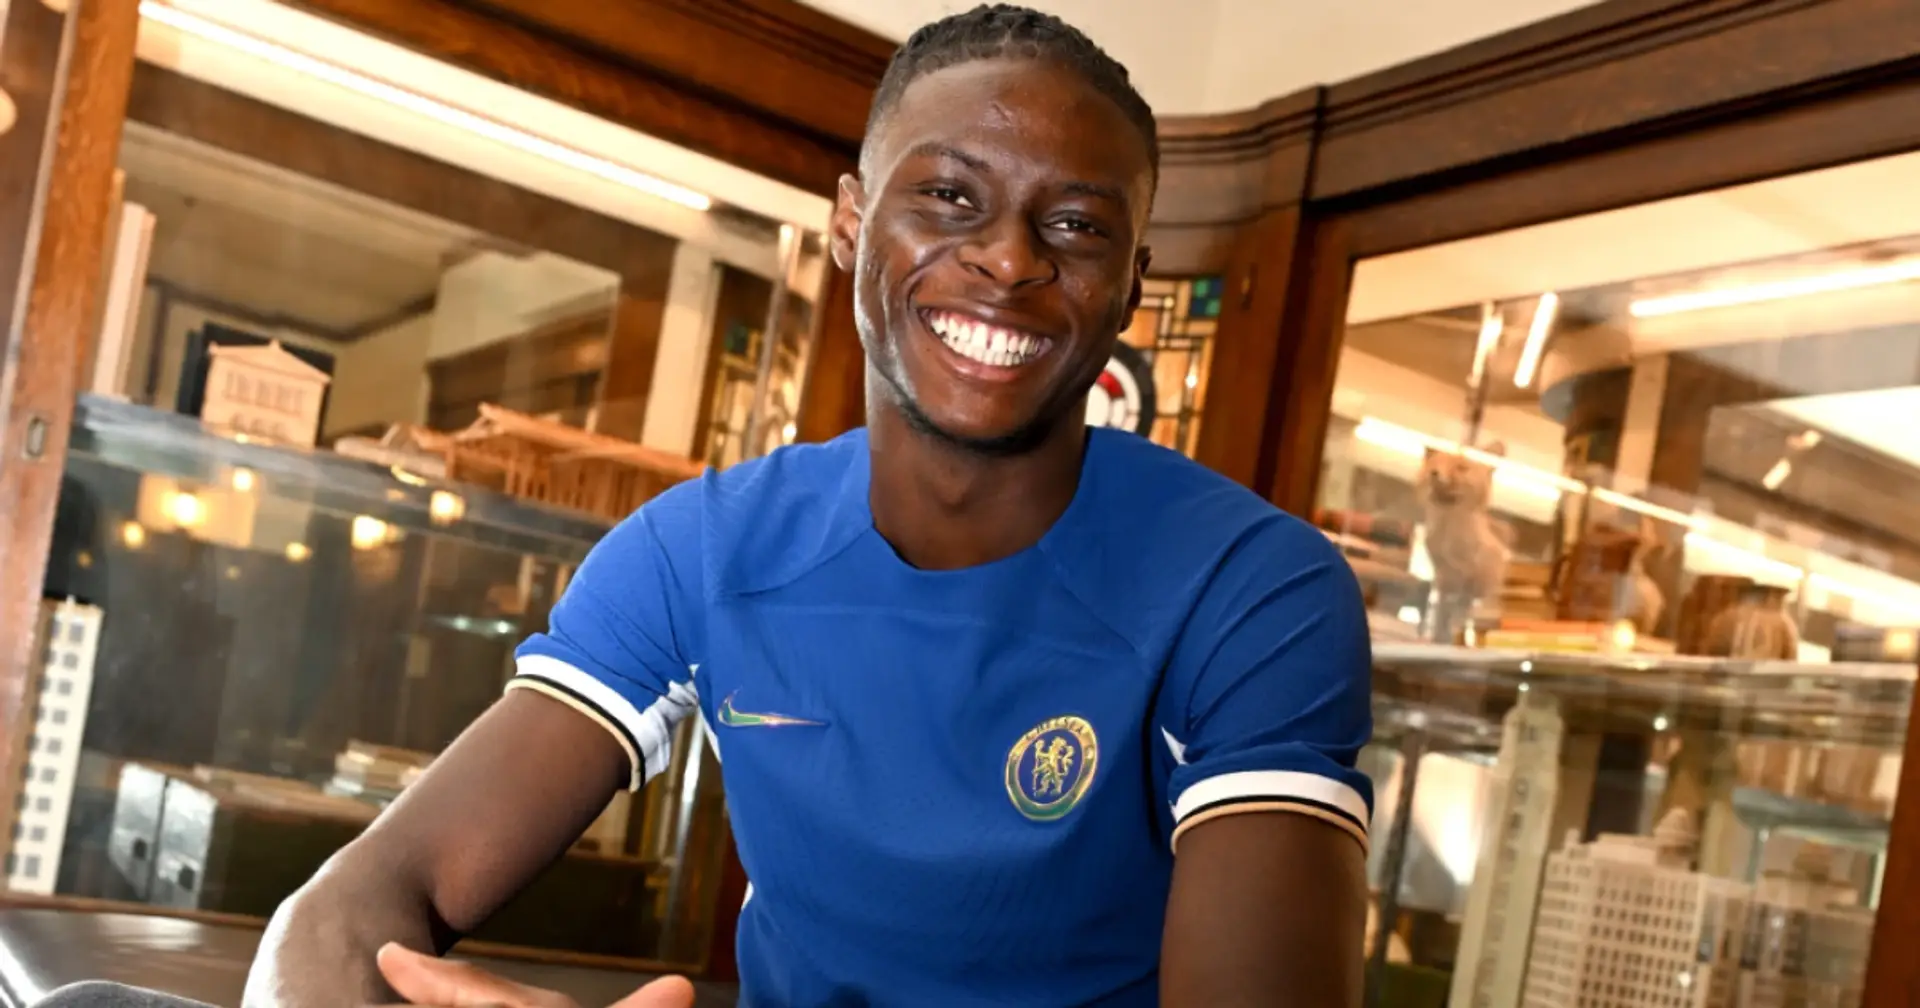 Chelsea complete the signing of Lesley Ugochukwu